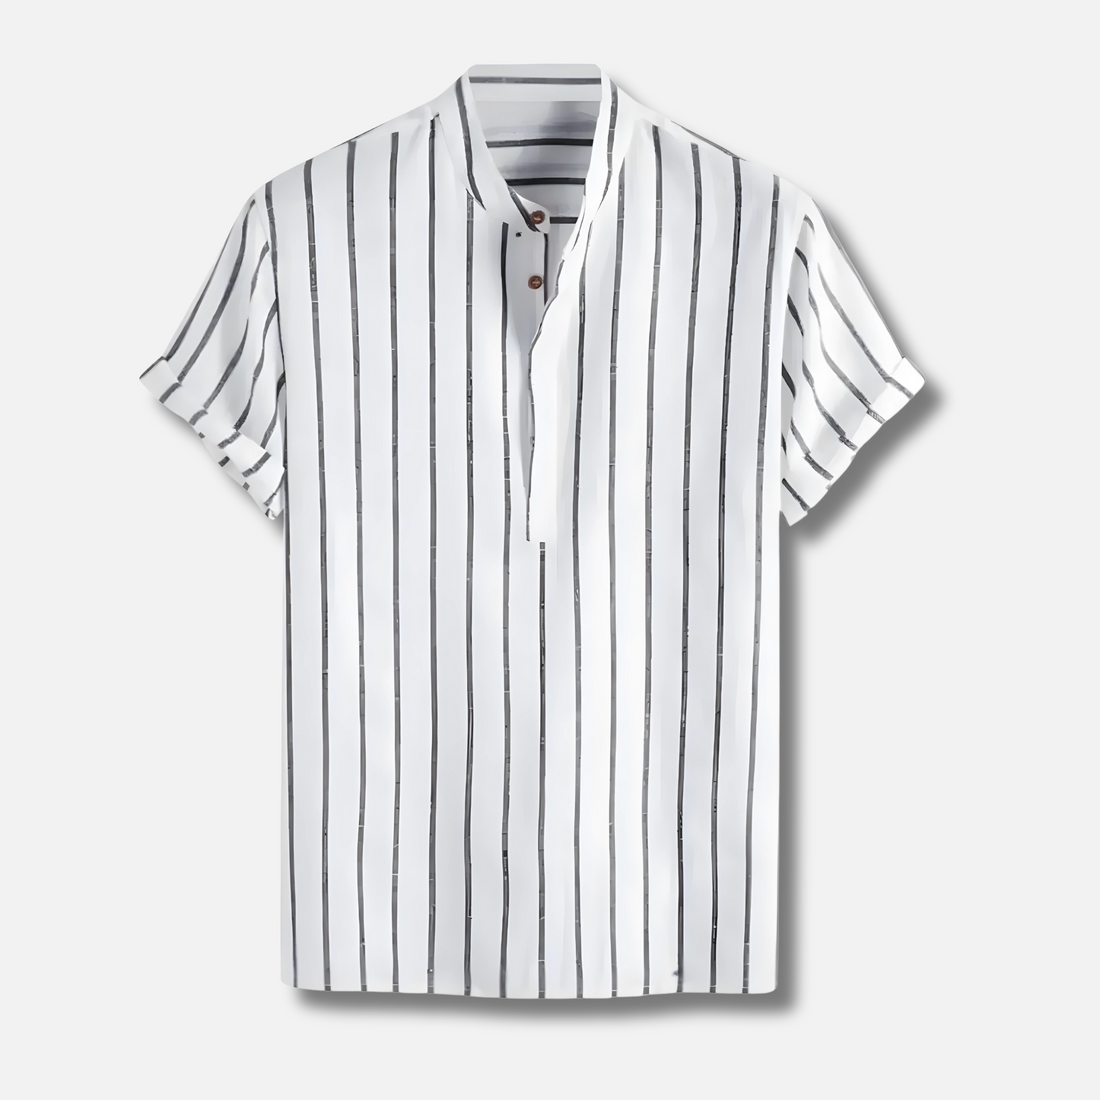 Dex - Men's Striped Shirt with Short Sleeves